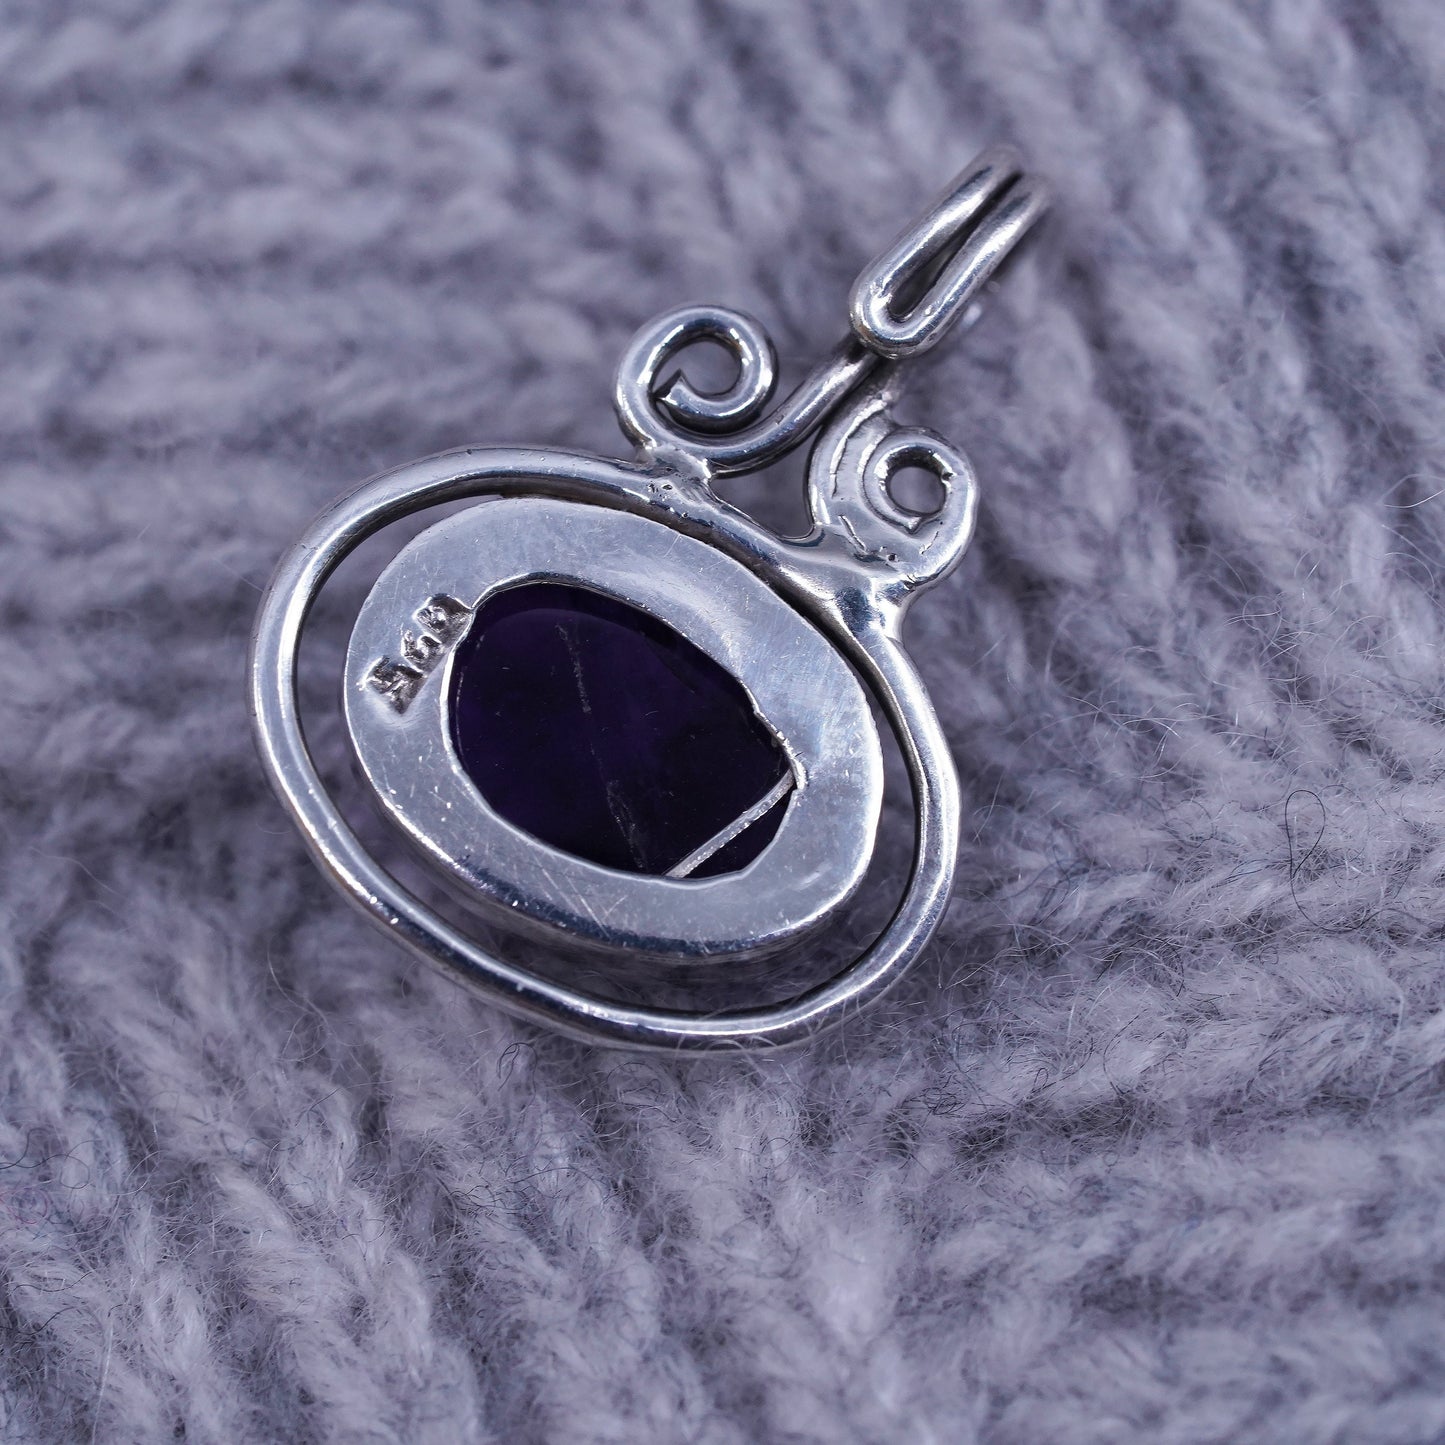 Vintage sterling 925 silver handmade pendant with oval amethyst